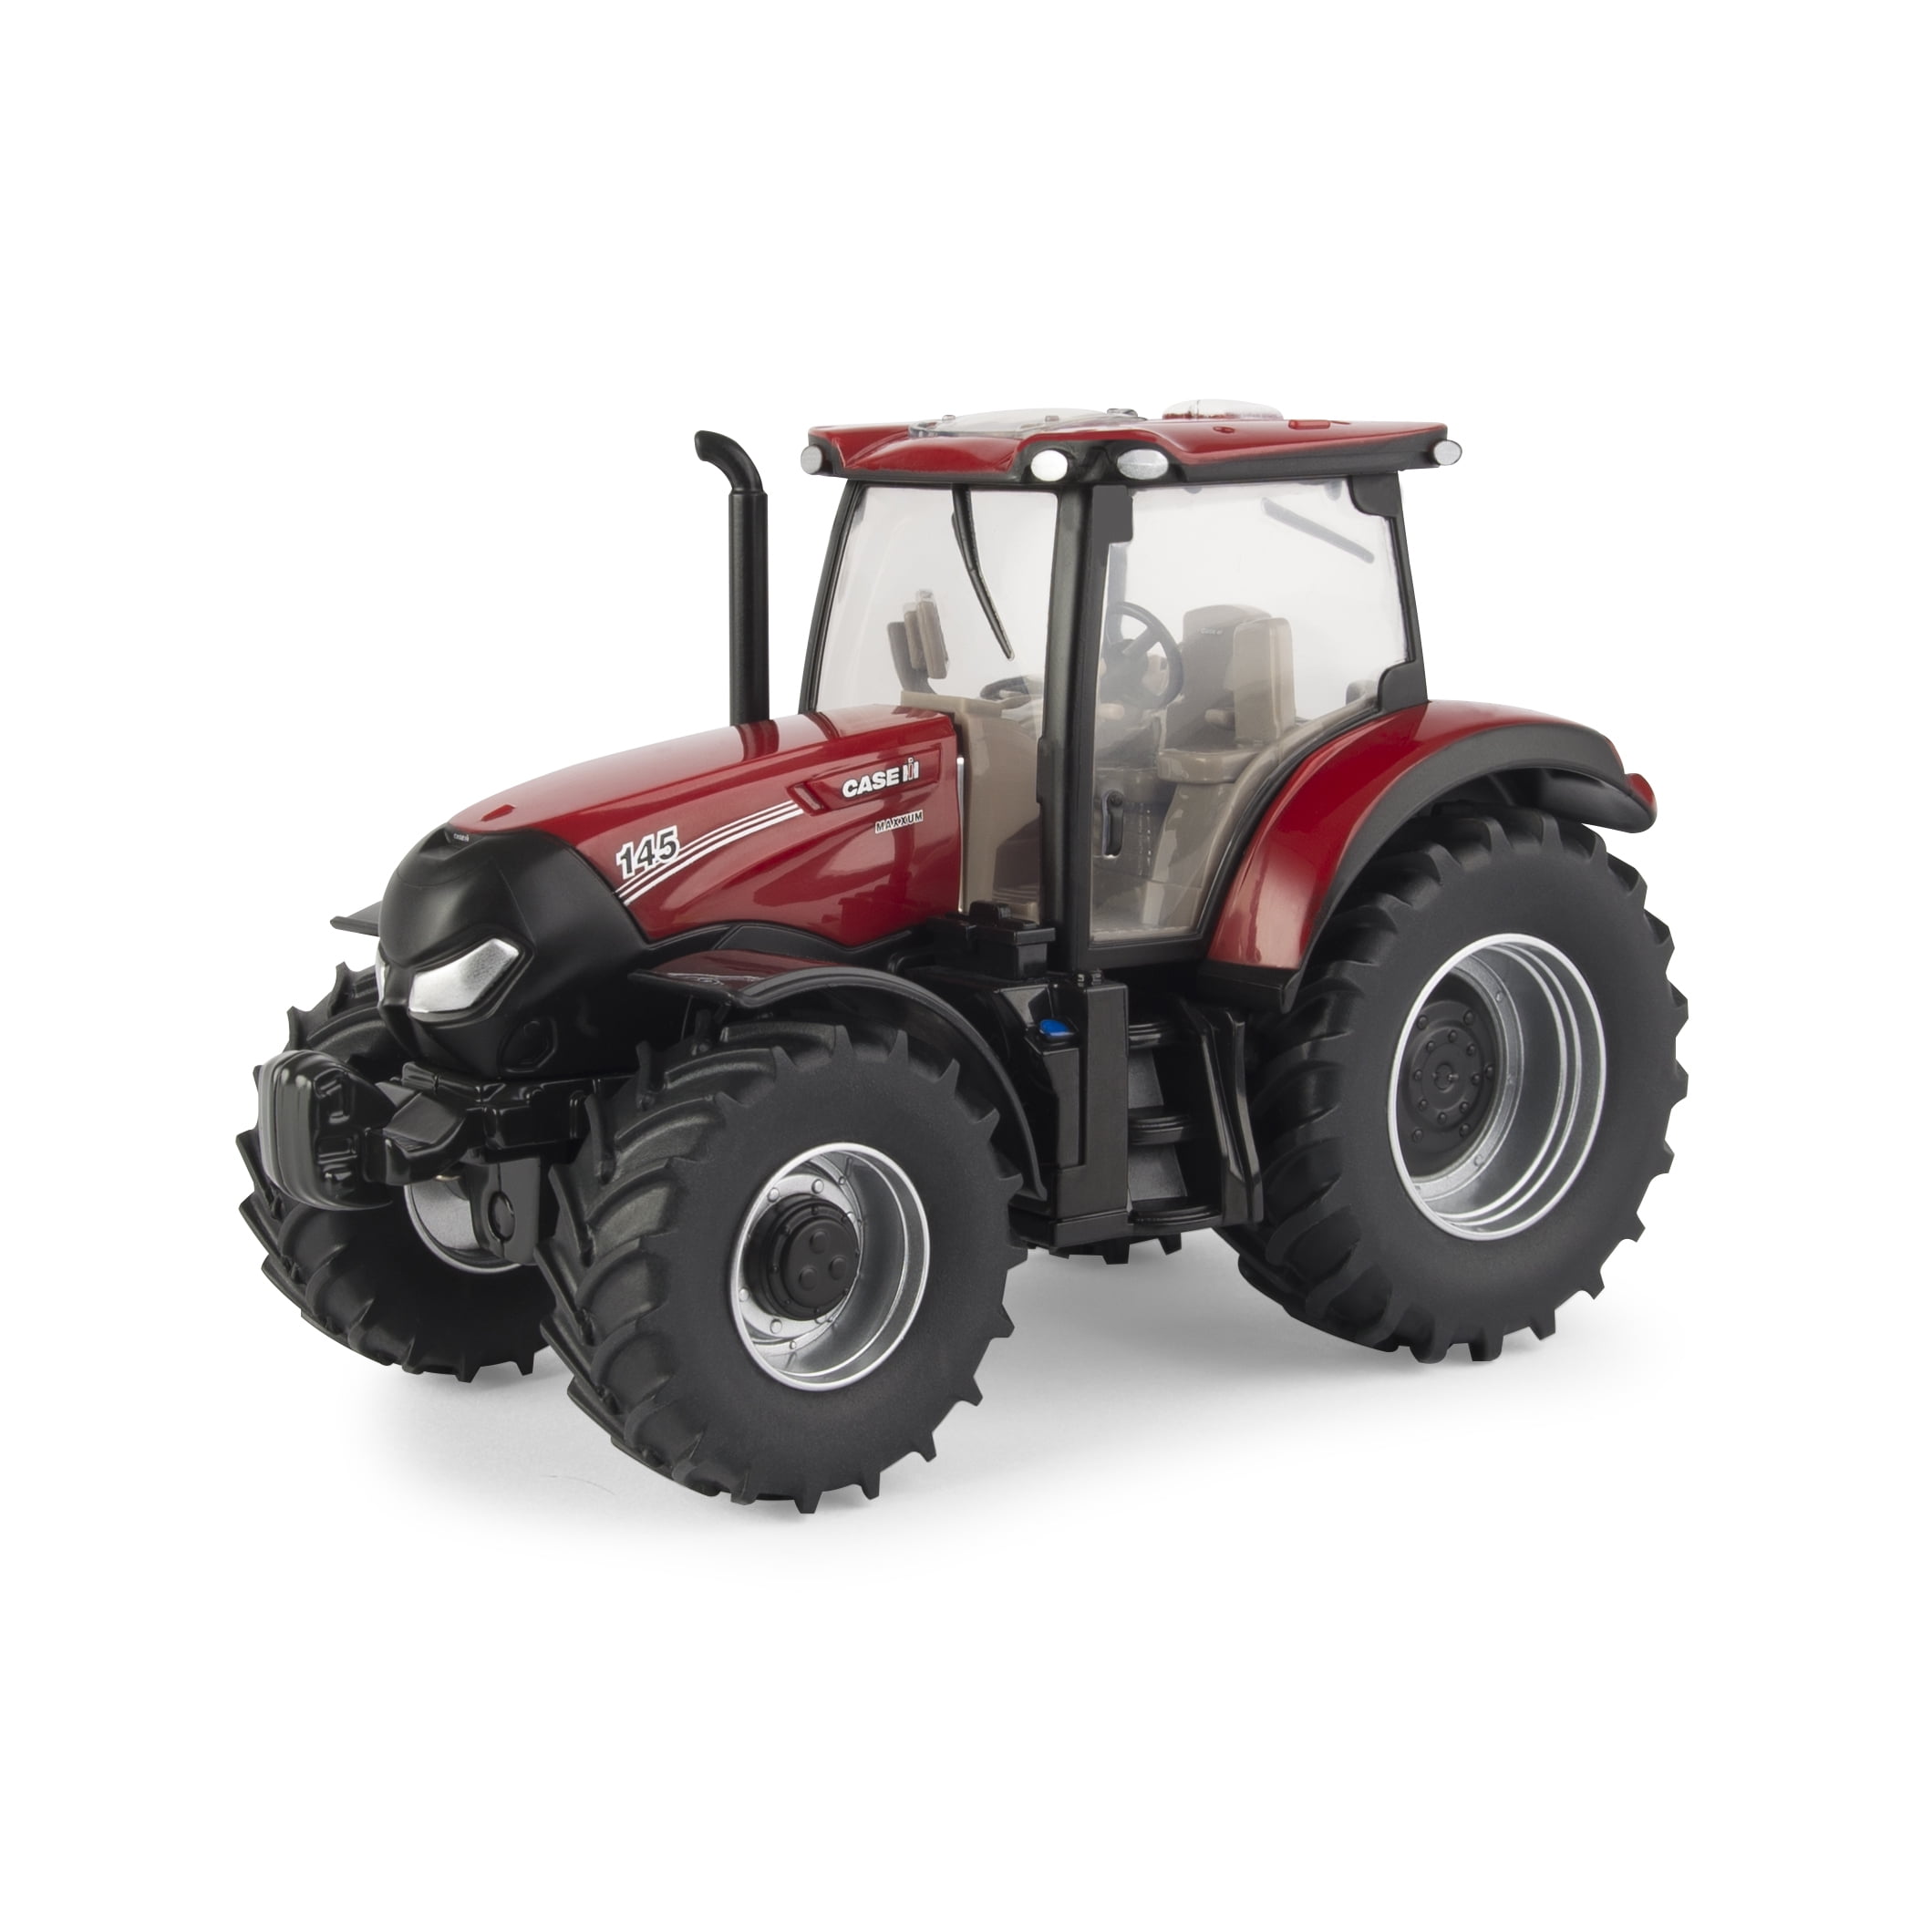 1 64 Case IH Maxxum 145 Tractor With Loader by Ertl for sale online 